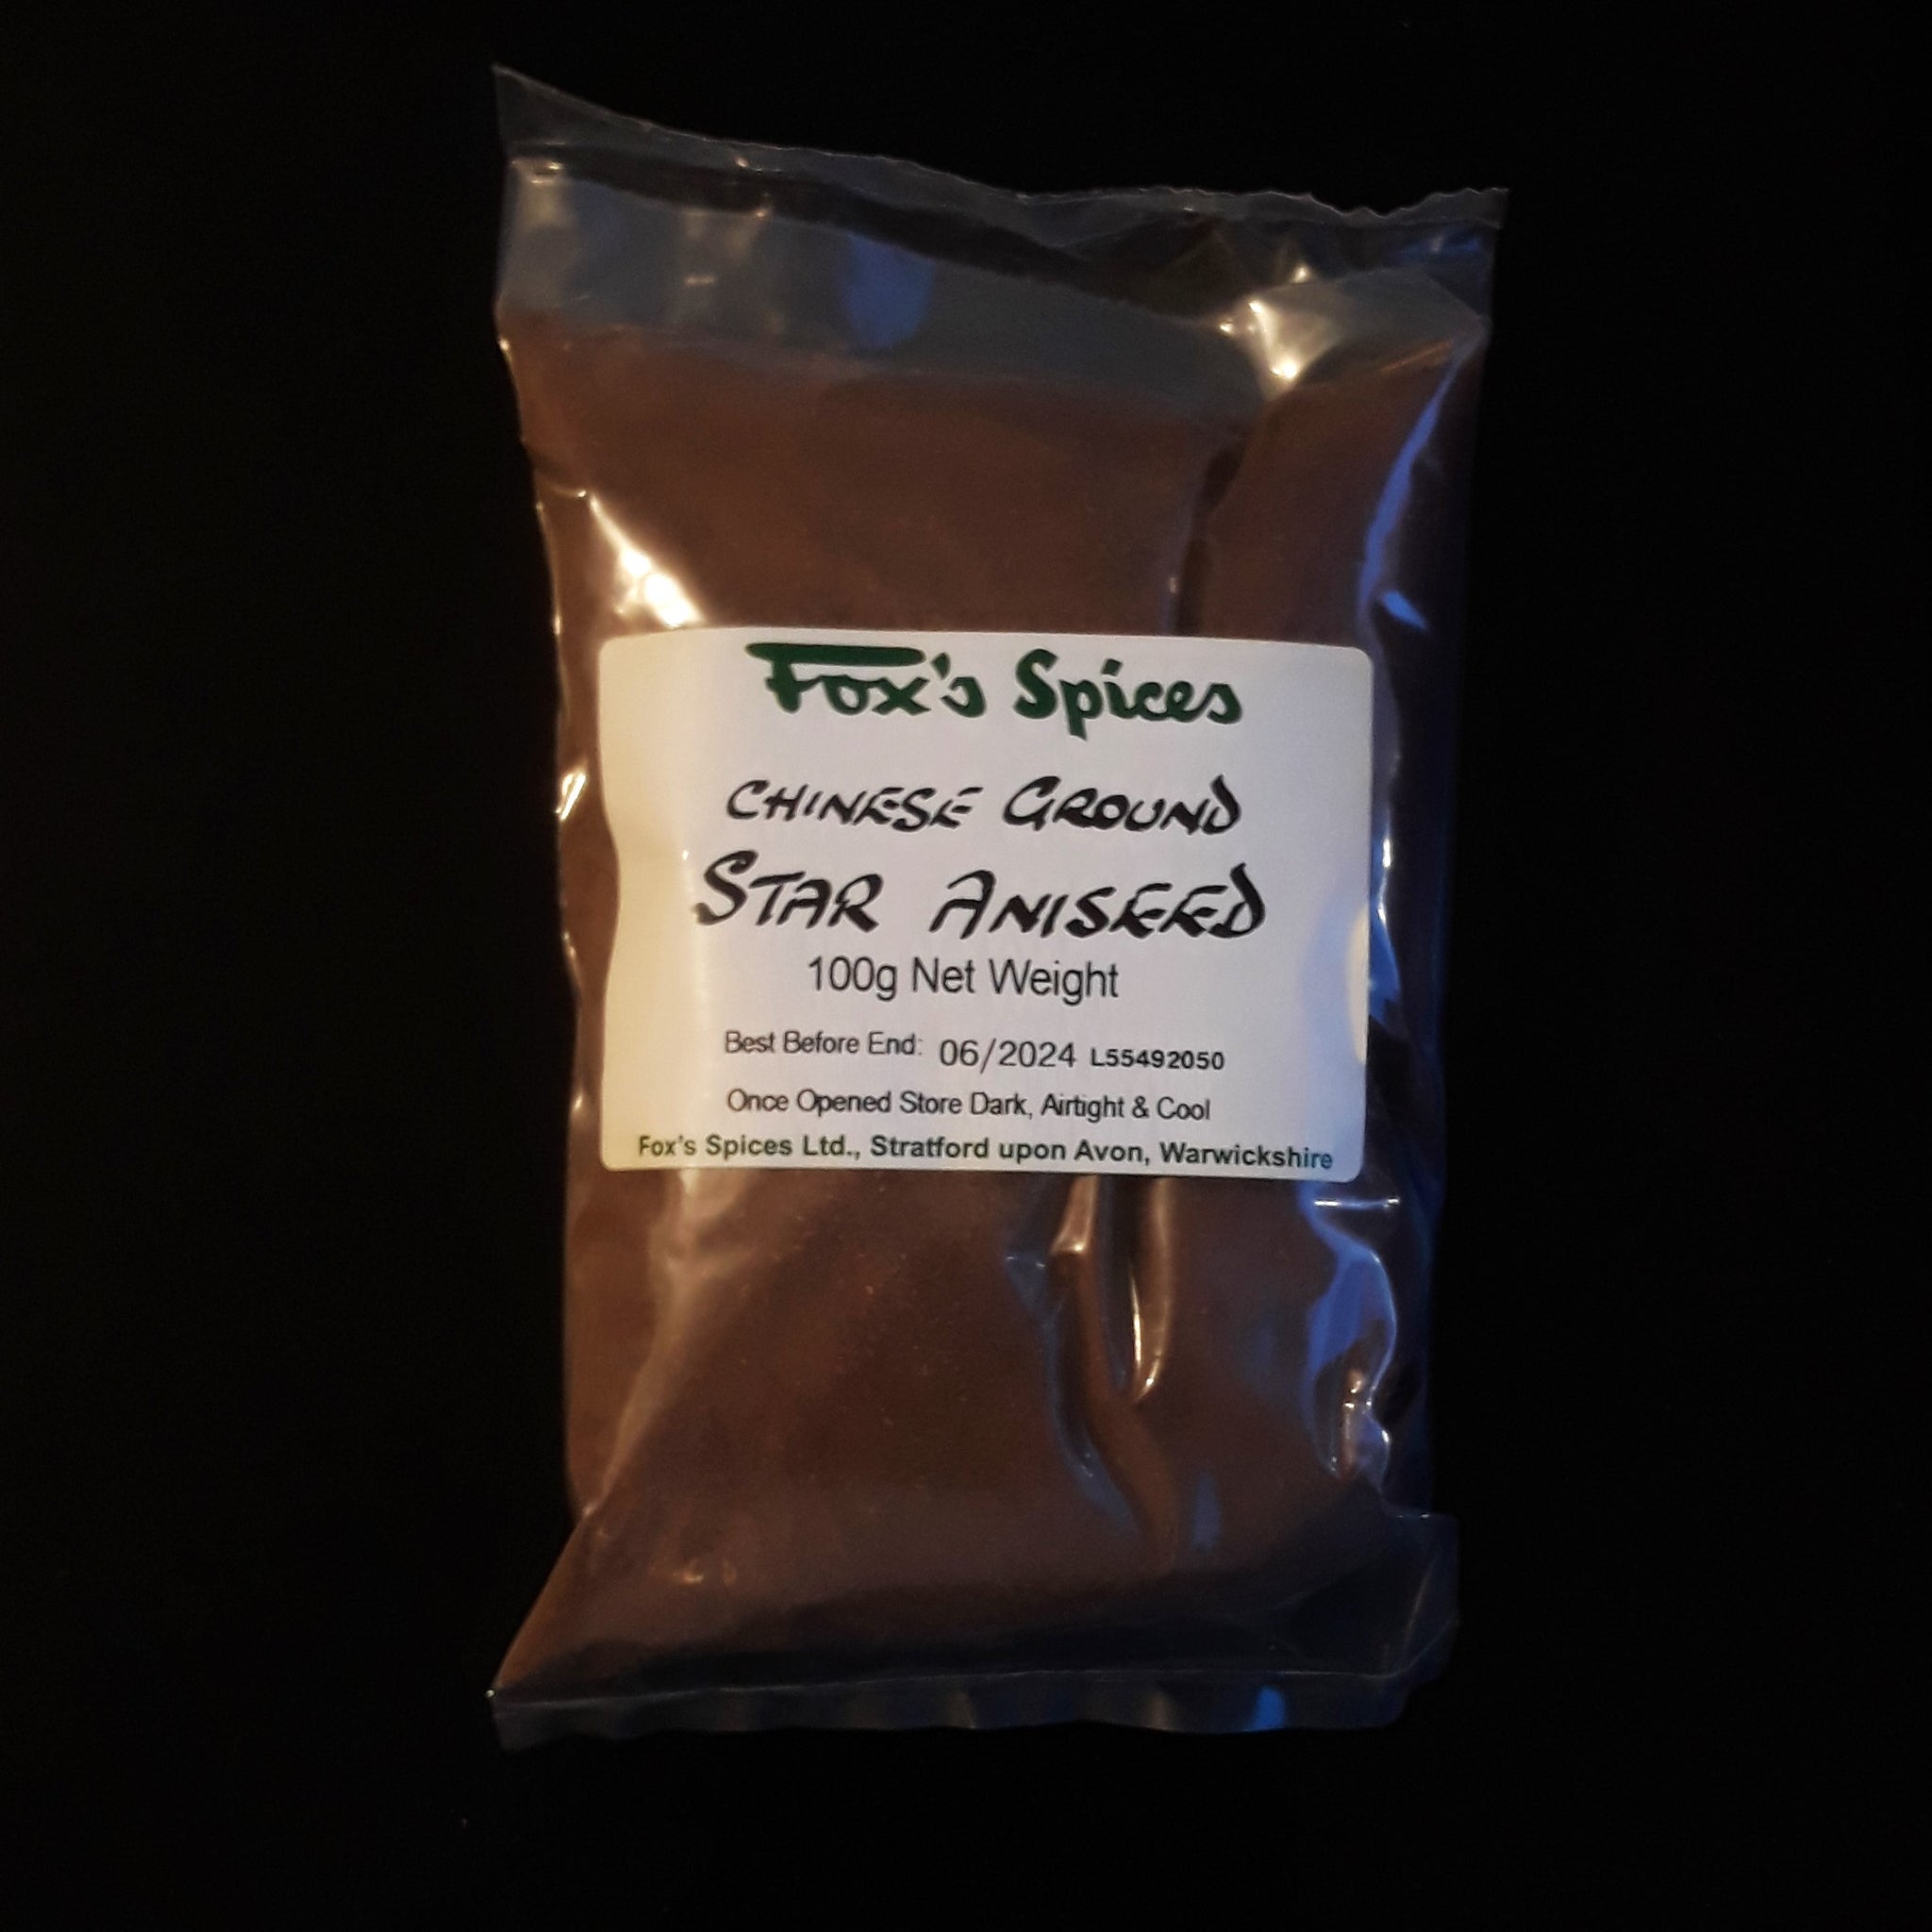 Ground Star Aniseed ground sold by Fox's Spices in 100g bags.